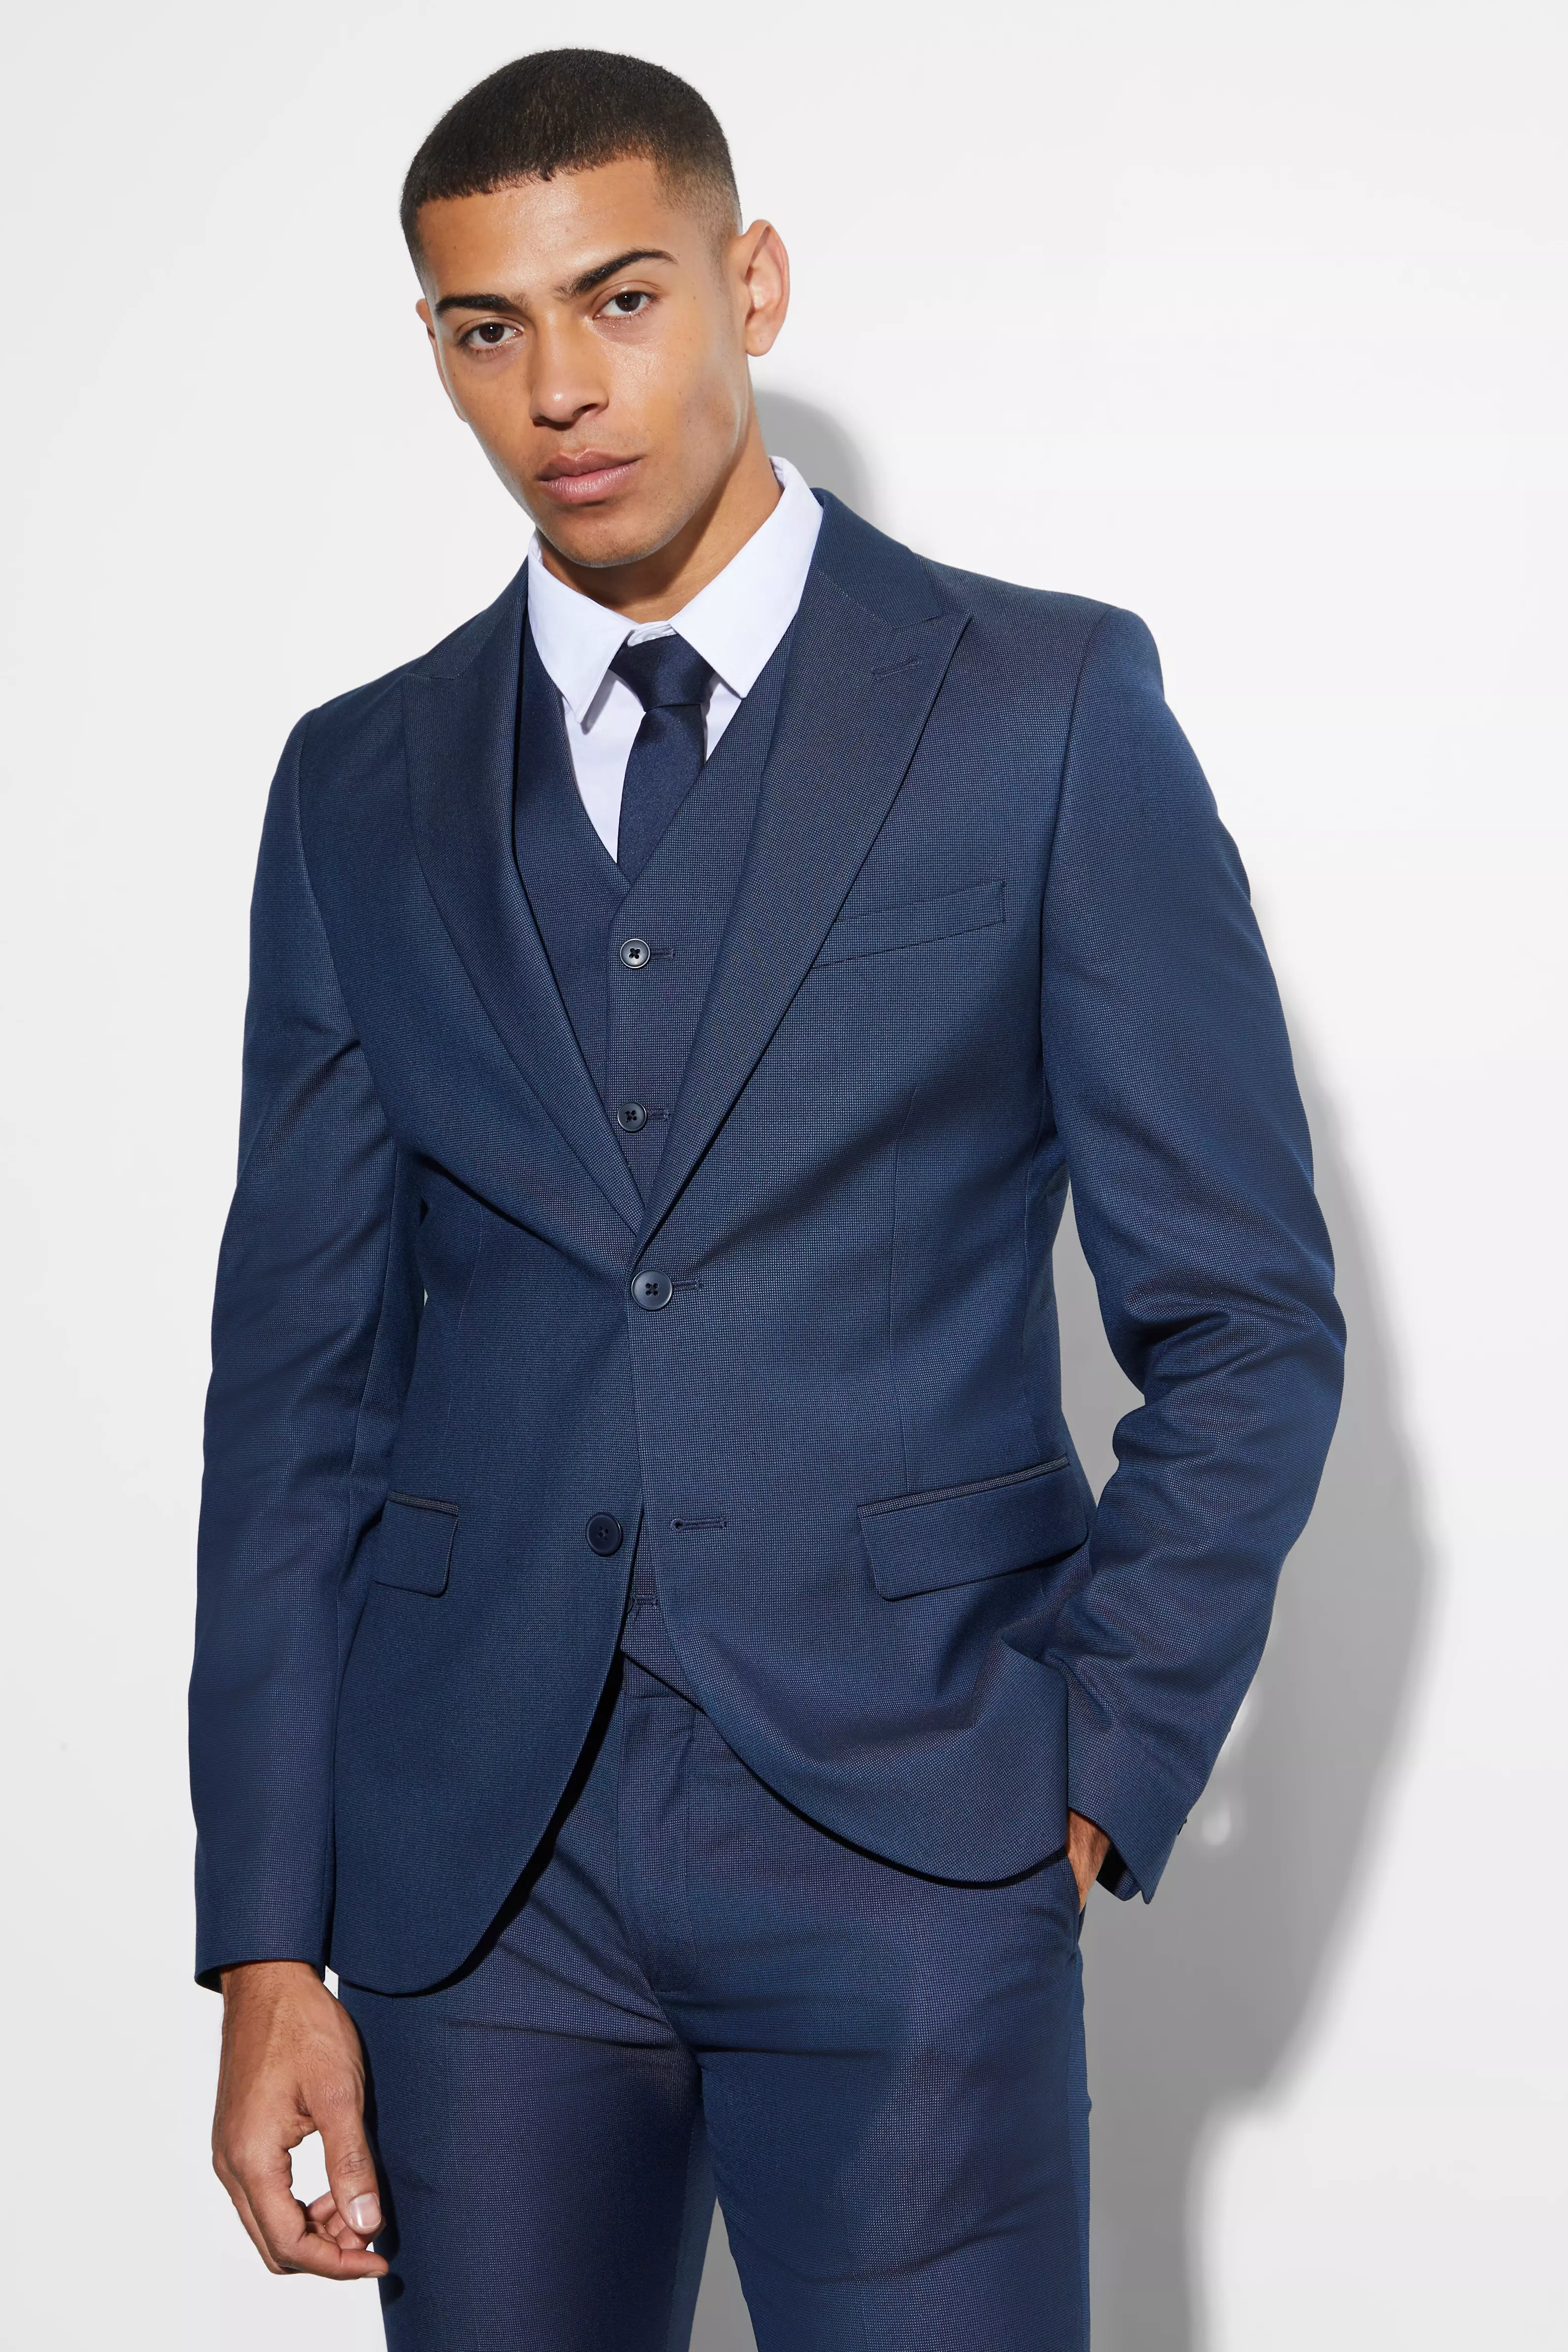 Skinny Single Breasted Pique Suit Jacket Navy